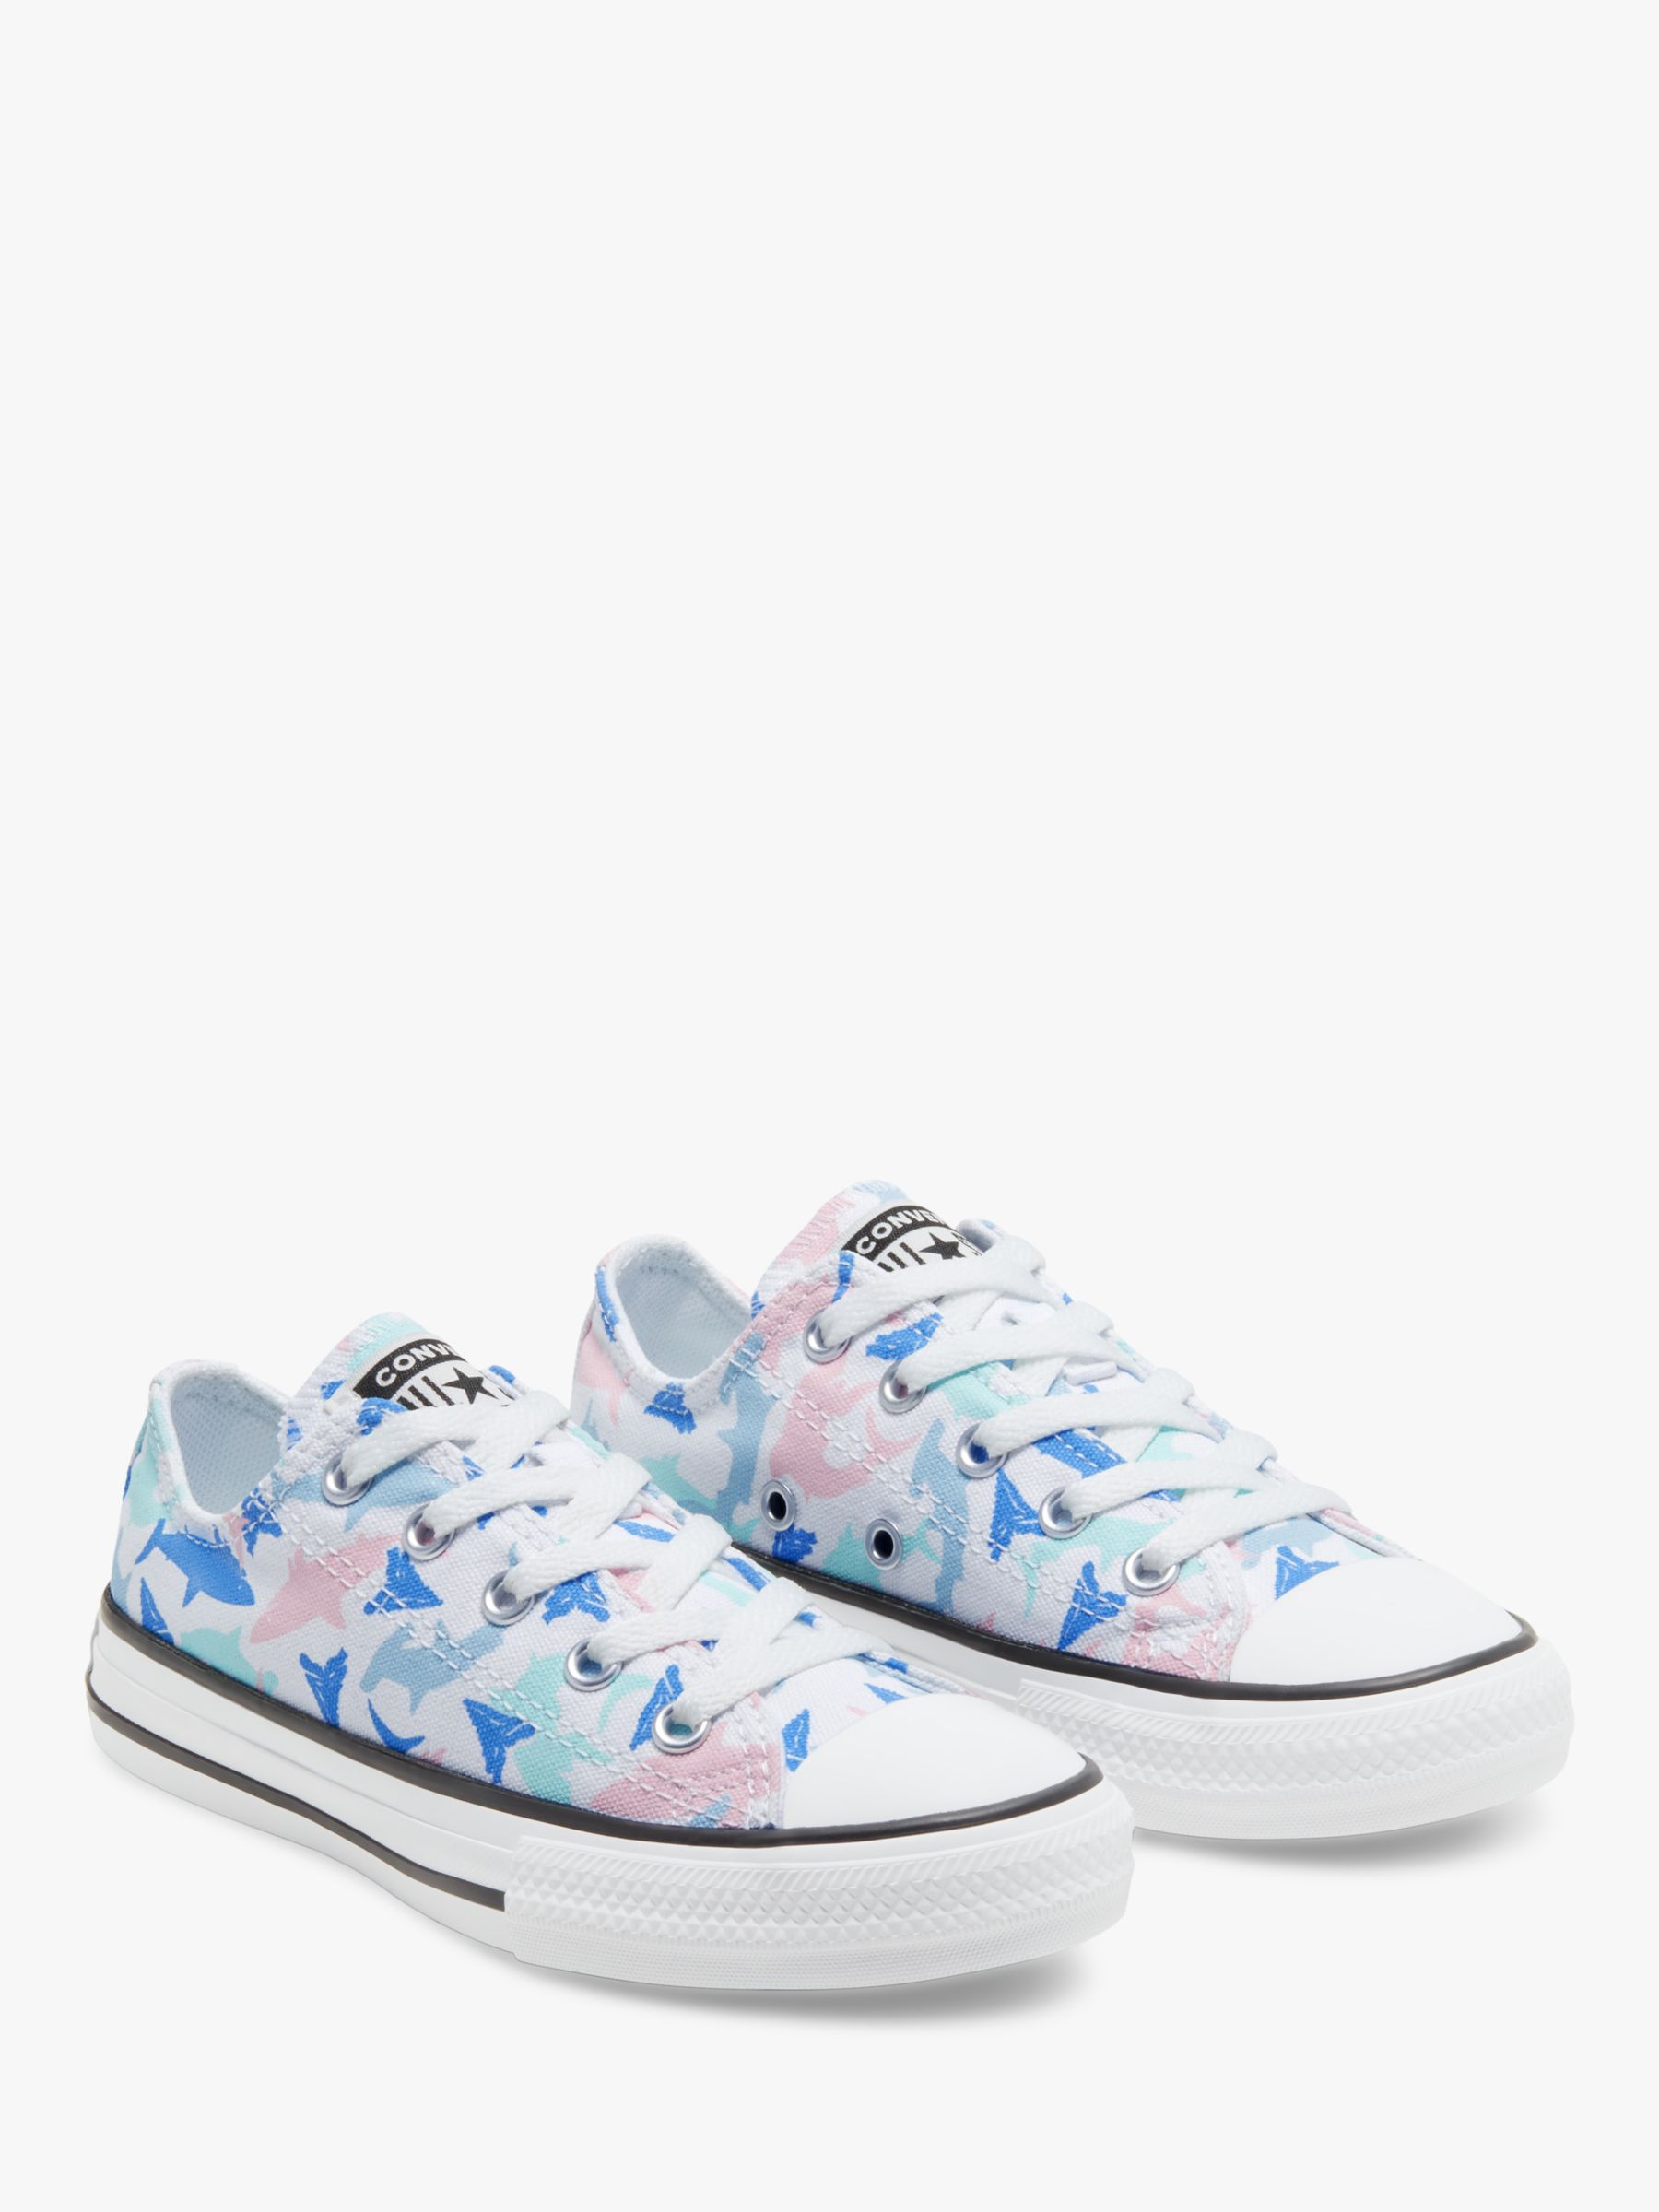 Converse Children's Chuck Taylor All Star Shark Bite Low Top Trainers ...